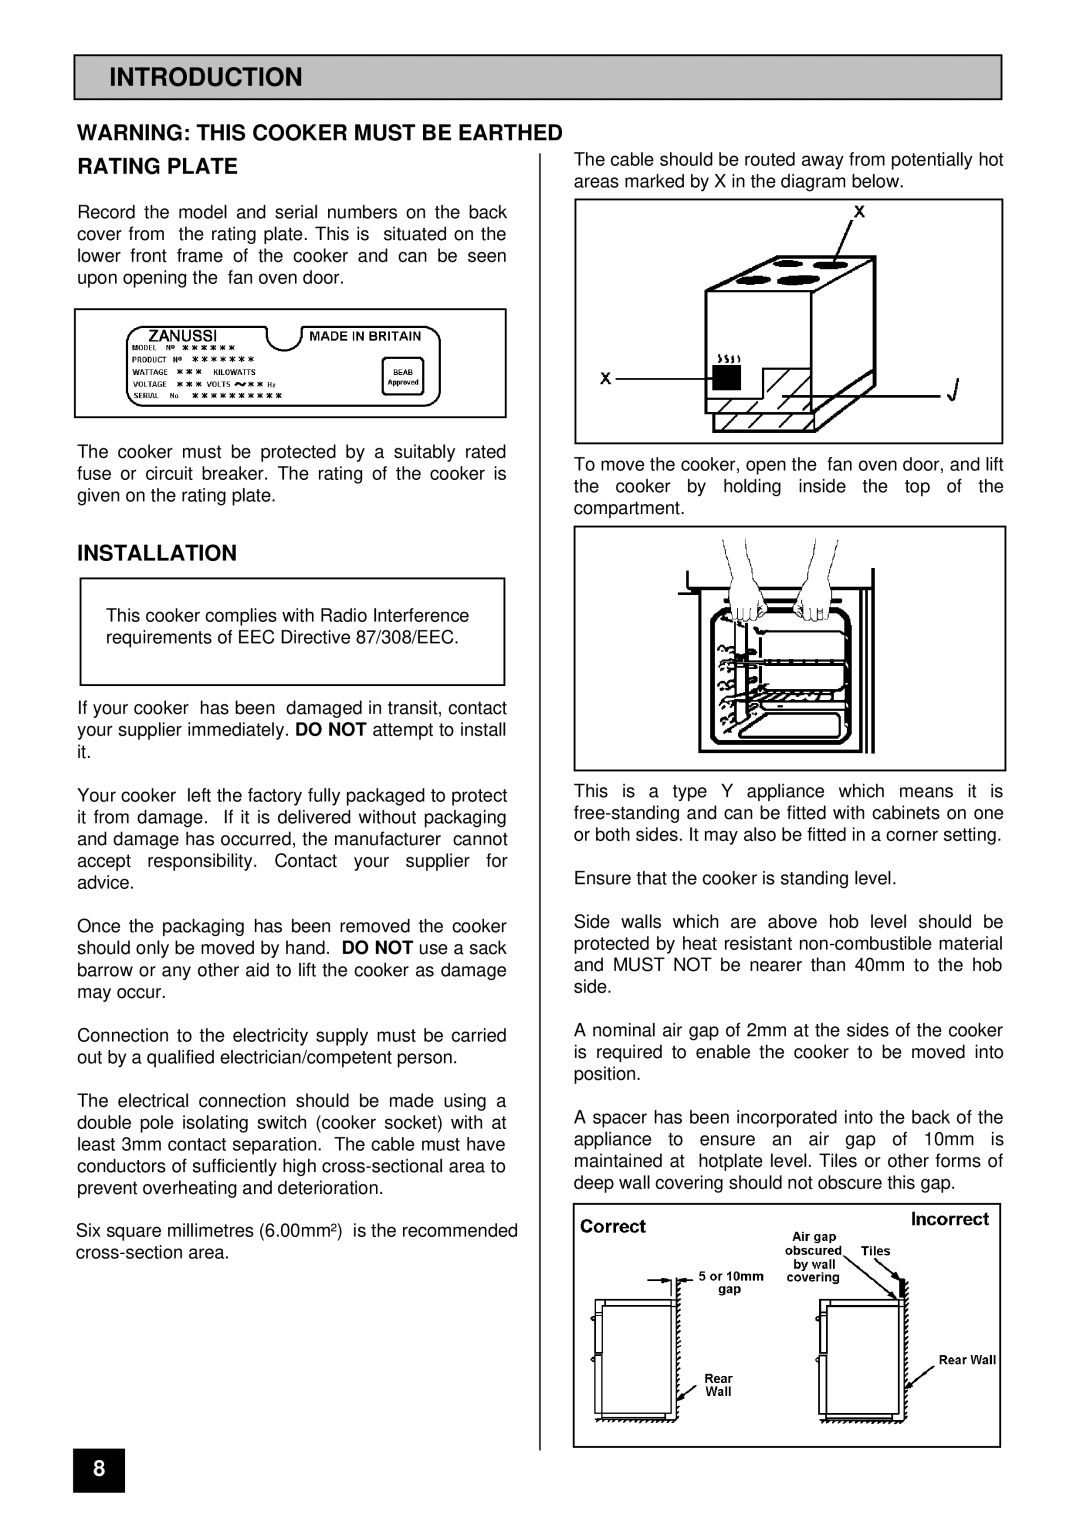 Zanussi ZCE 7200 manual Introduction, Rating Plate, Installation 